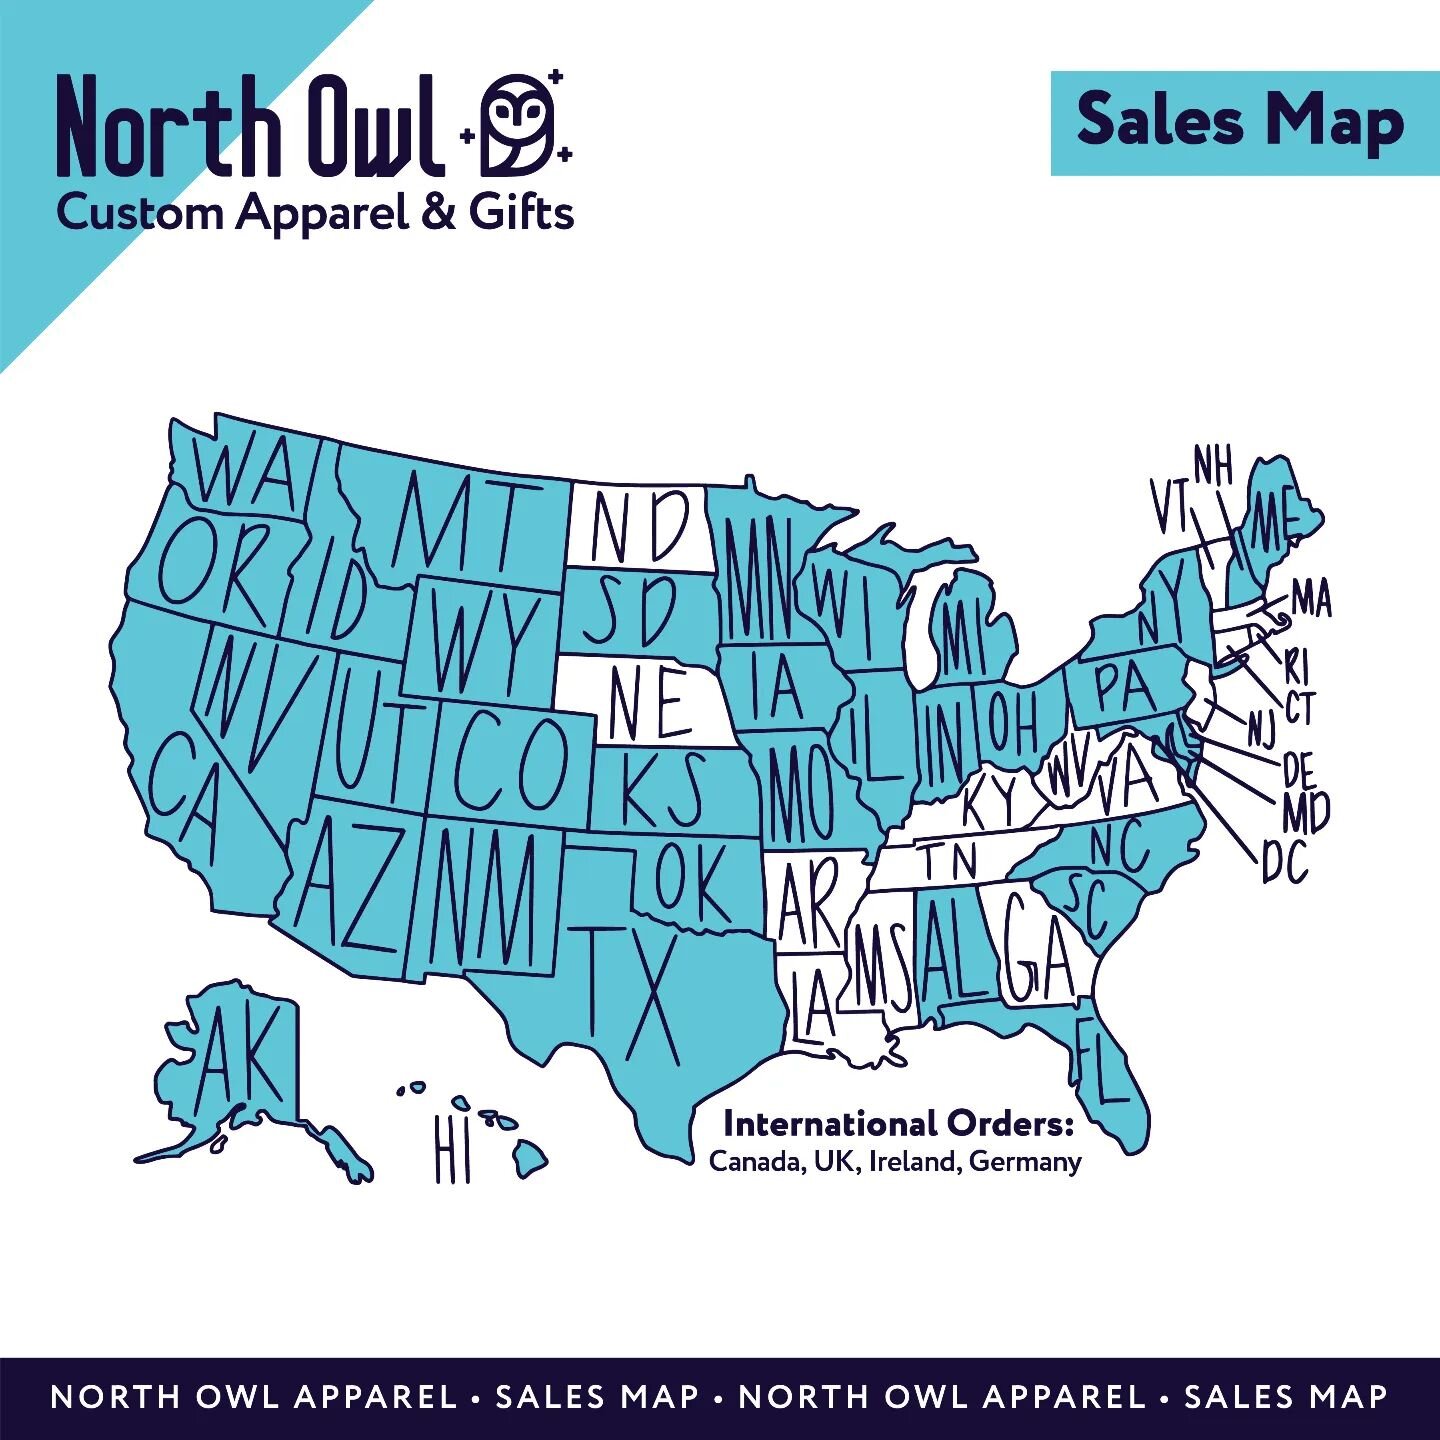 I'm thrilled to announce that I'm getting closer to achieving my sales goal of reaching all 50 states! Just a couple of weeks ago, I received an order from Utah, which marked off the entire left side of the United States on my sales map. It was such 